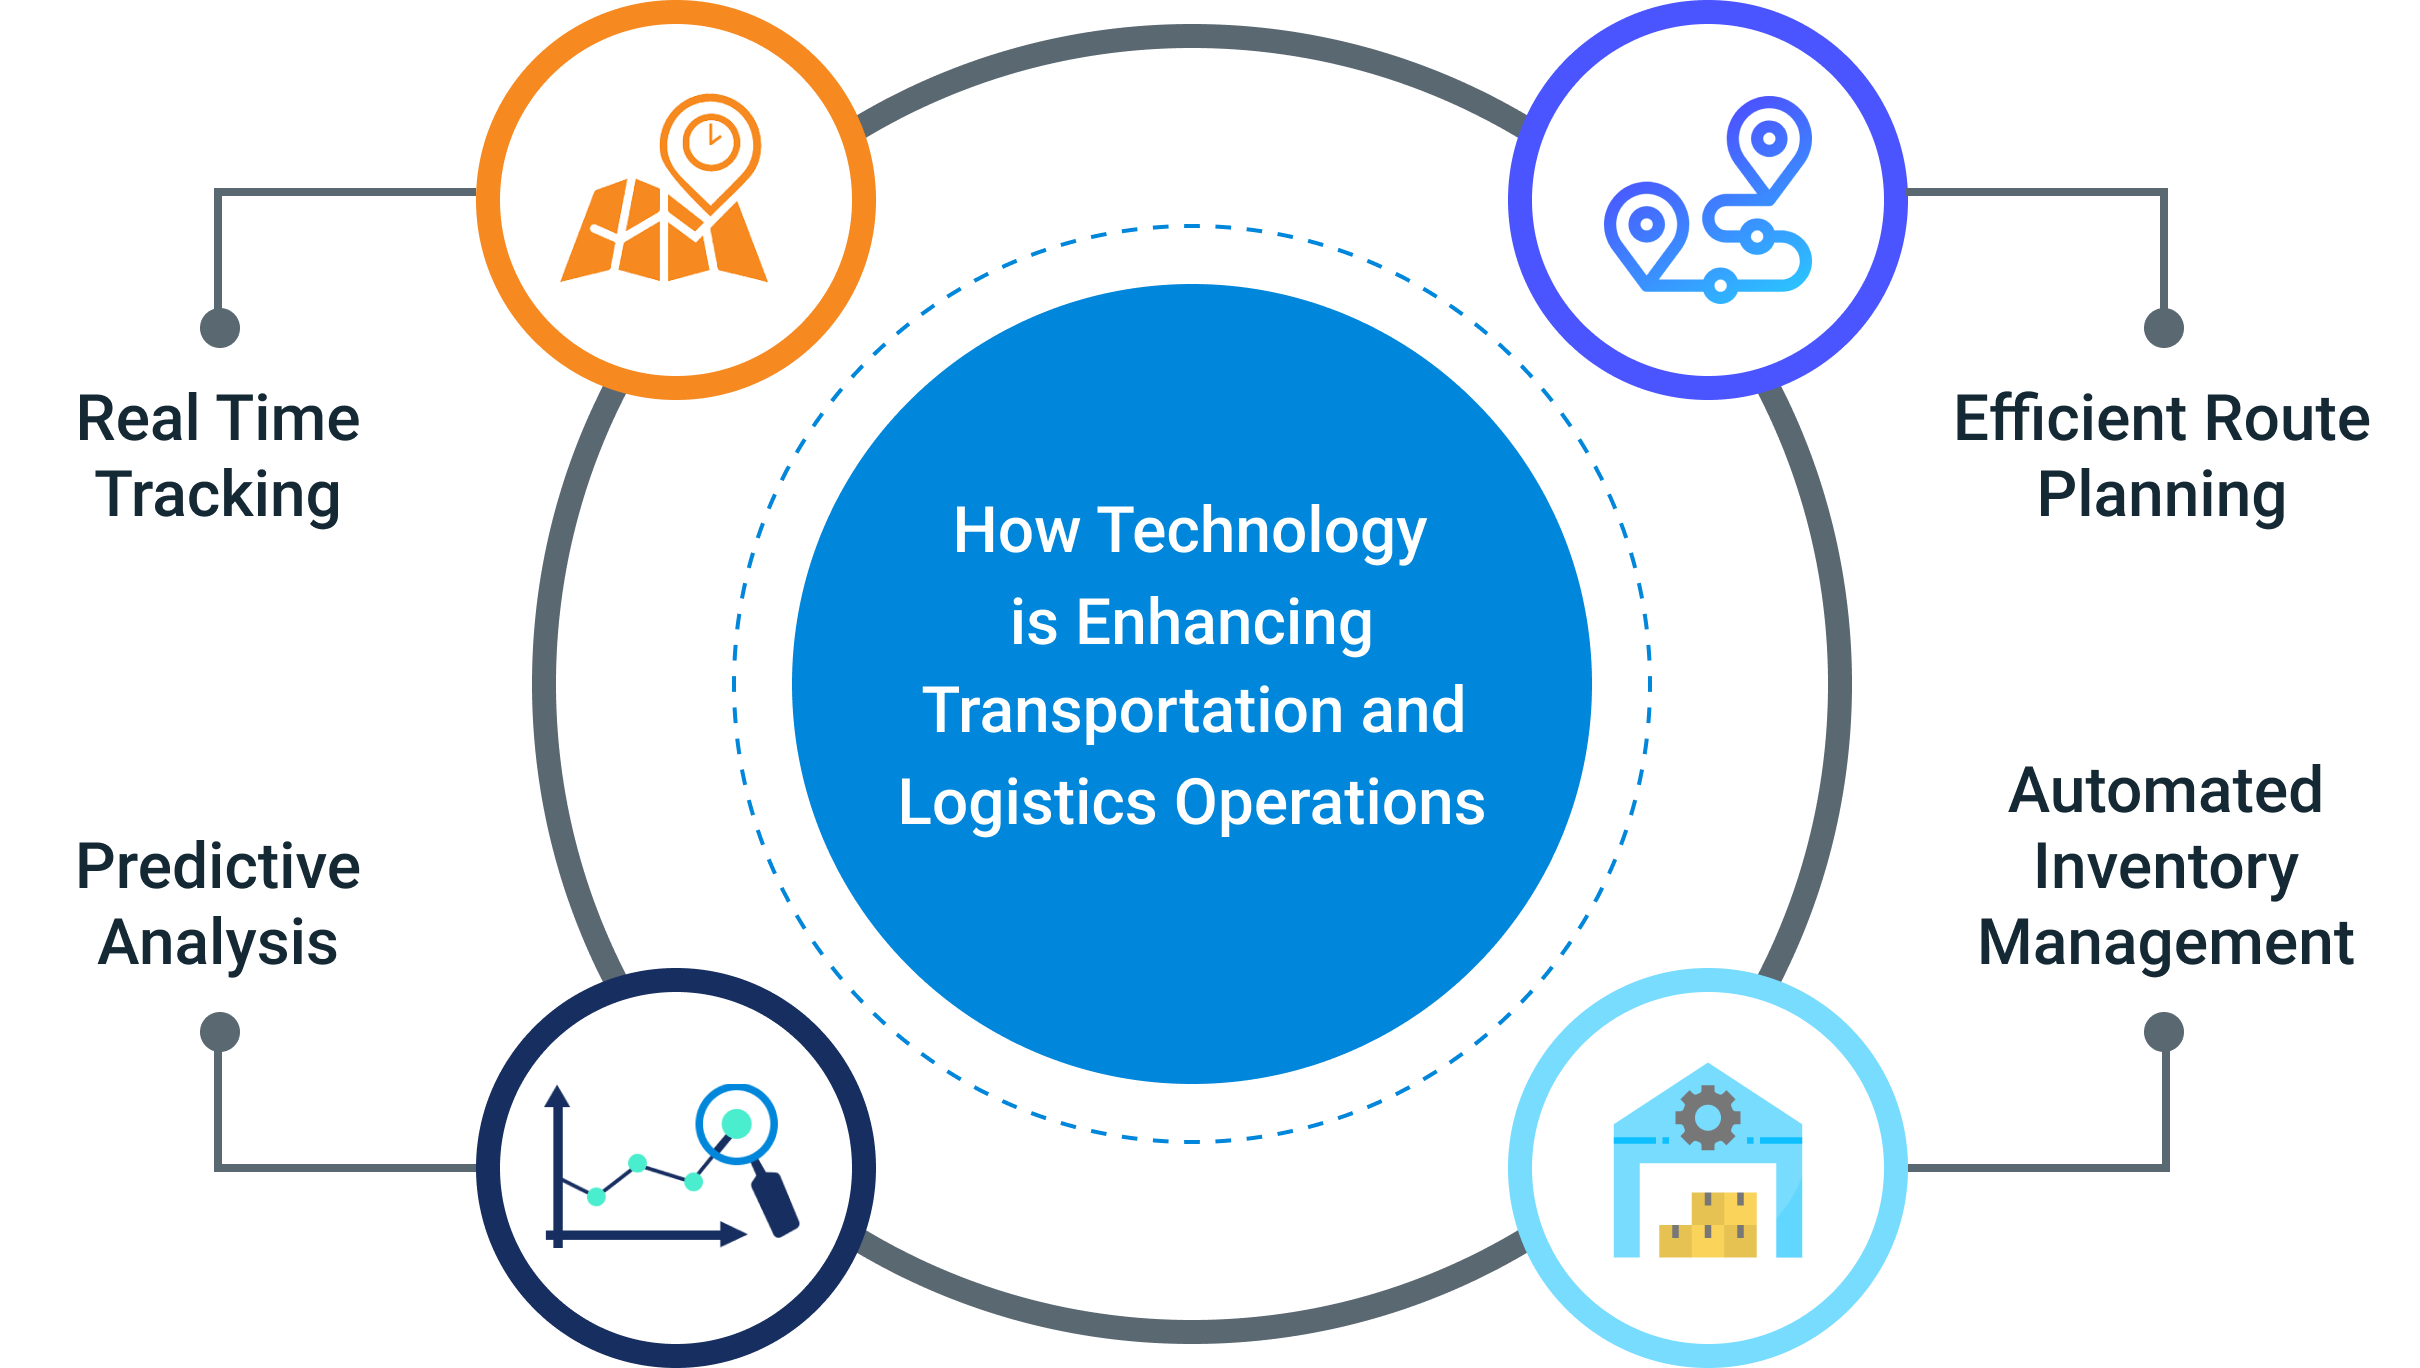 How Technology is Enhancing Transportation and Logistics Operations